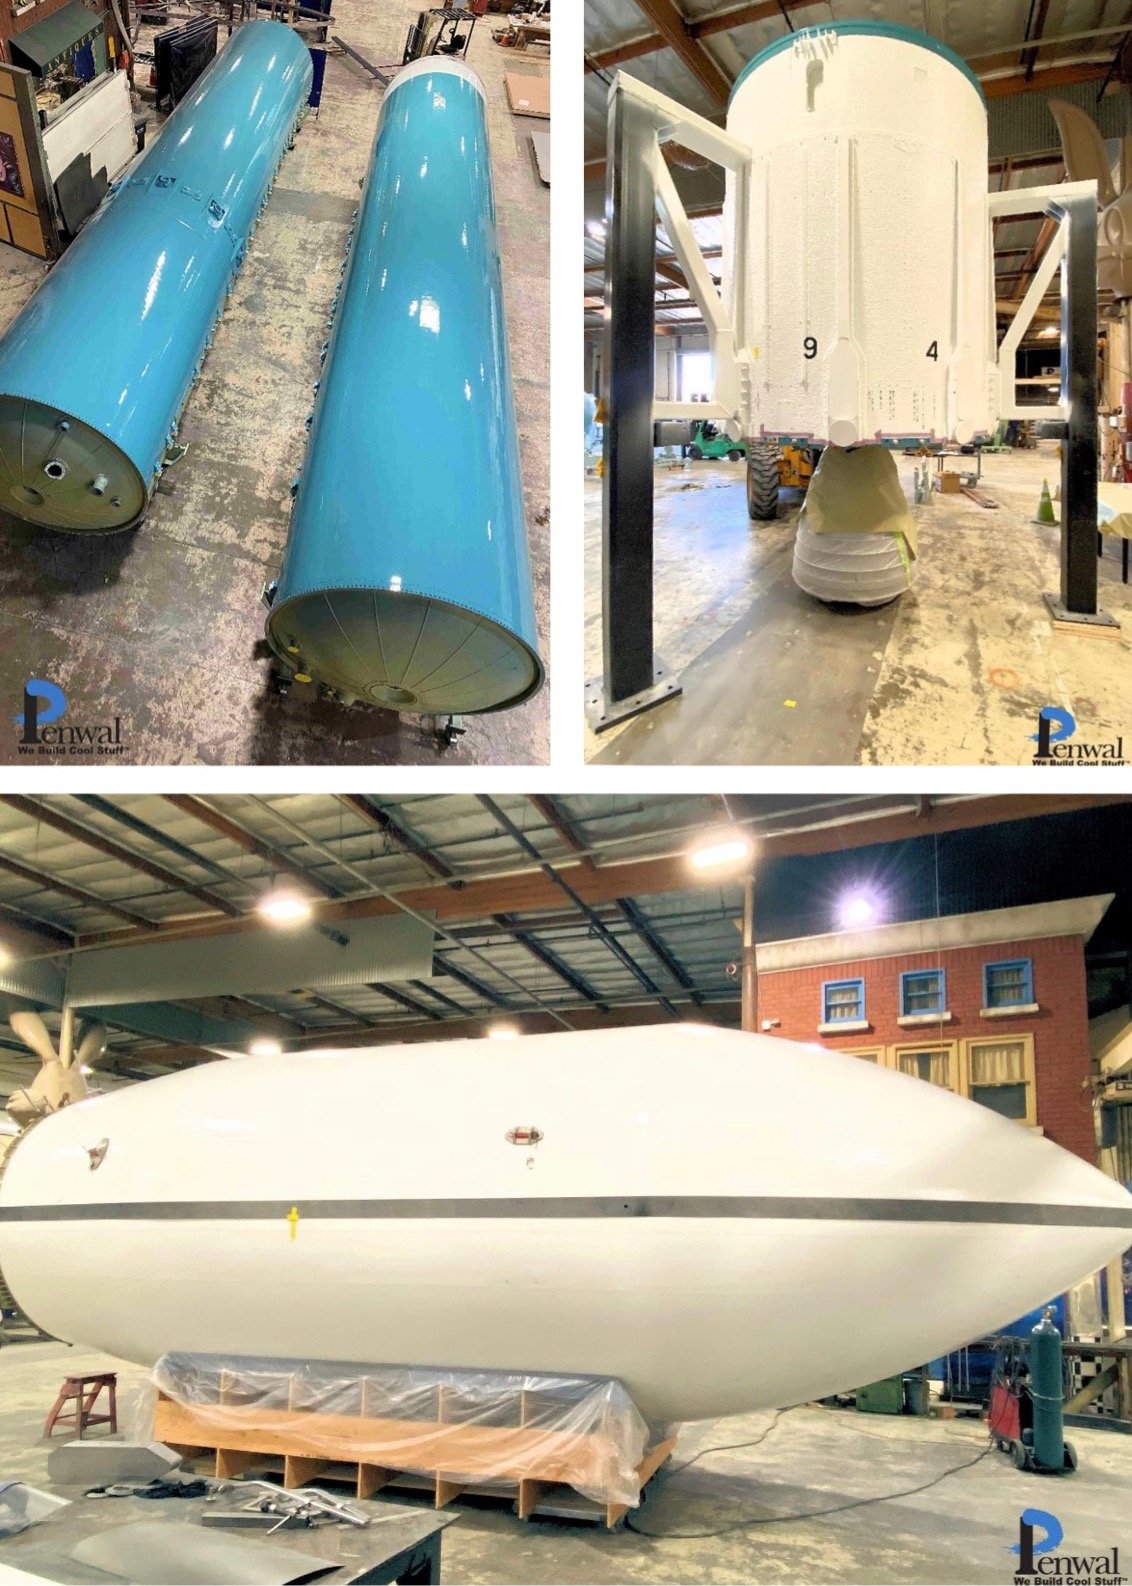 The Delta II first stage tank assemblies, engine section and payload fairing are ready to ship to the exhibit site. Photo by Penwal